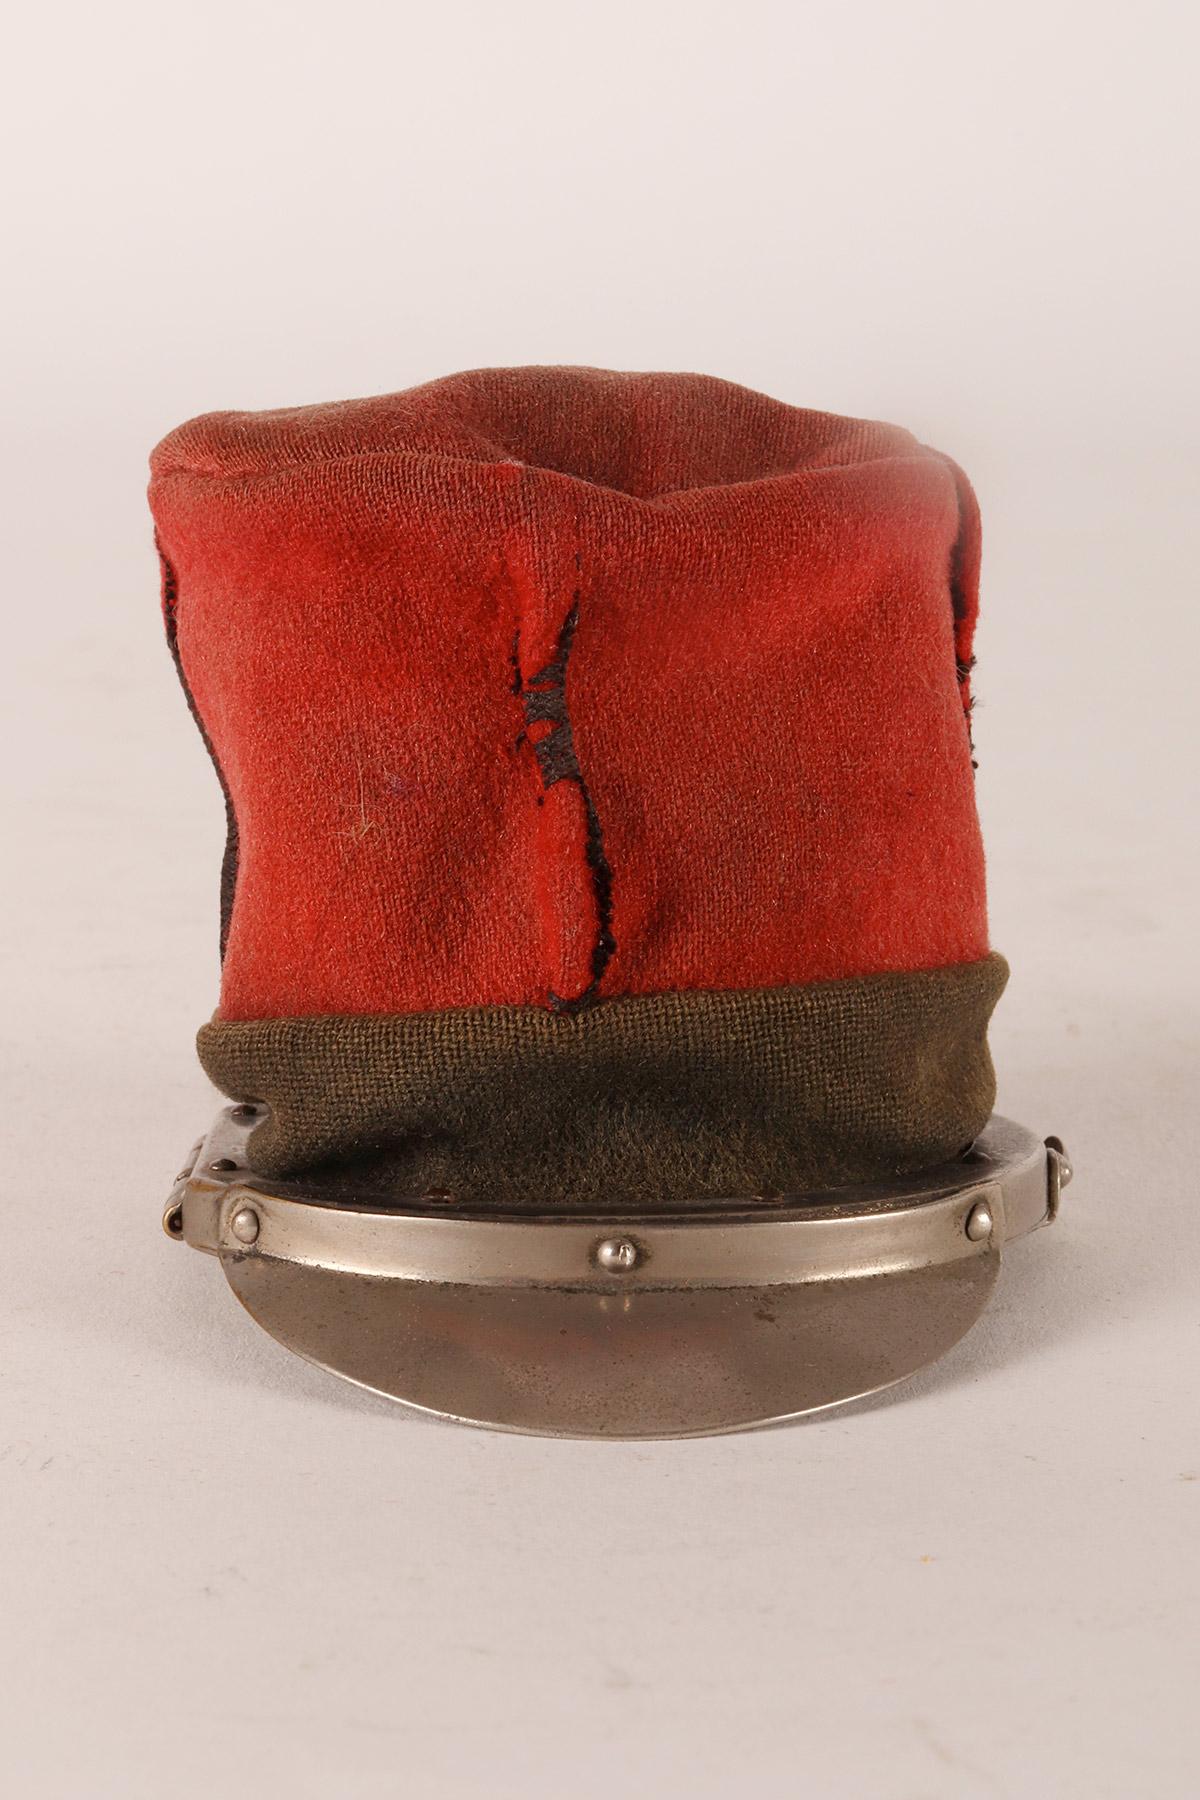 Metal A military cap snuffbox, Paris, France beginning of 20th century. For Sale